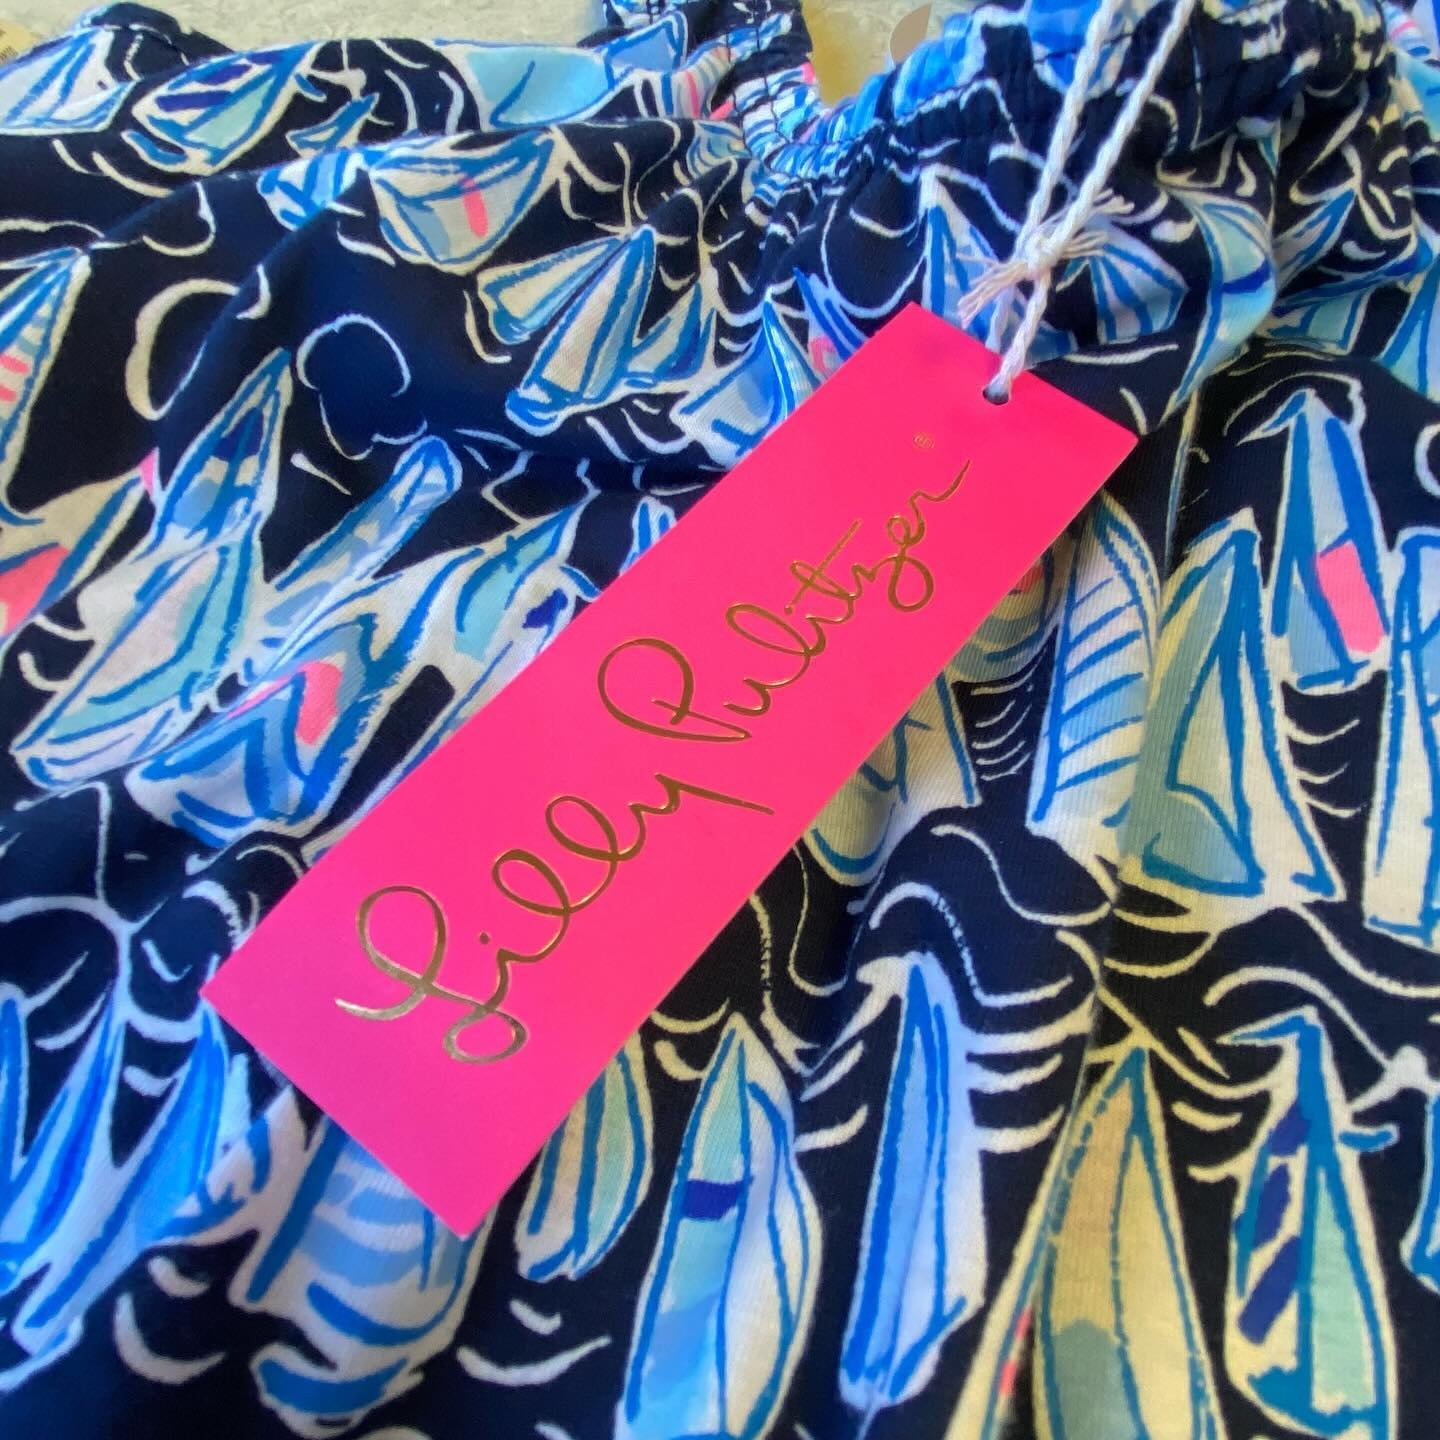 NWT Lilly Pulitzer Dress with built in shorts, retail $138, size 10/12, our price $47.95! 💙💖💙